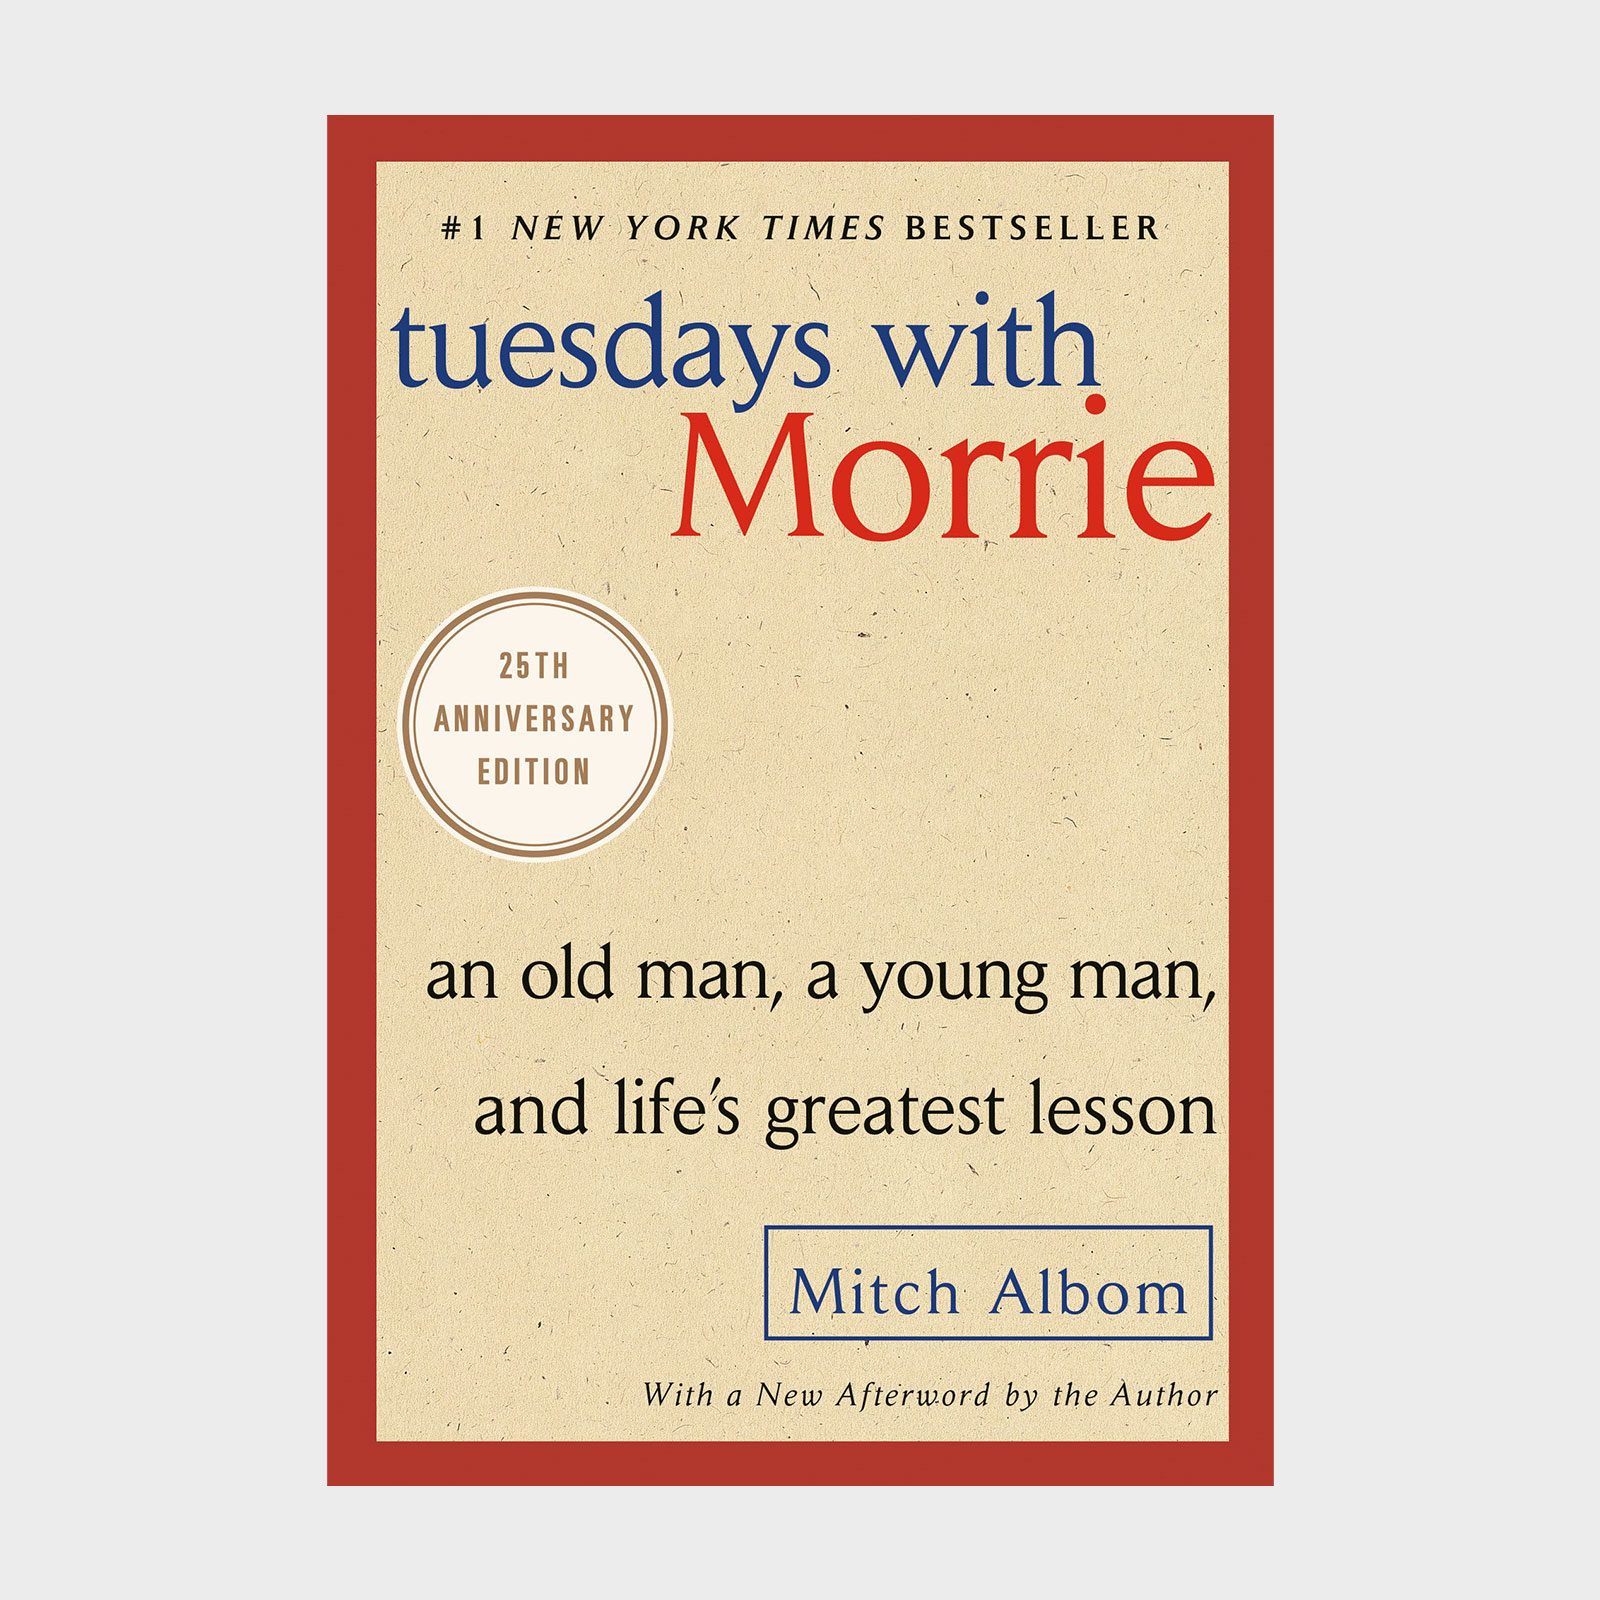 <p>For bestselling author Albom, it was his college professor Morrie Schwartz's sound advice that gave the young writer a more profound view of the world. Years later, as that view was waning and Morrie's insights fading, Albom rekindled his relationship with his old mentor. Every Tuesday, Albom sat in Morrie's study for lessons on living, all chronicled in one of the most popular inspirational books, 2002 fan-favorite <em><a href="https://www.amazon.com/Tuesdays-Morrie-Greatest-Lesson-Anniversary/dp/076790592X" rel="noopener">Tuesdays with Morrie</a>.</em></p> <p class="listicle-page__cta-button-shop"><a class="shop-btn" href="https://www.amazon.com/Tuesdays-Morrie-Greatest-Lesson-Anniversary/dp/076790592X">Shop Now</a></p>